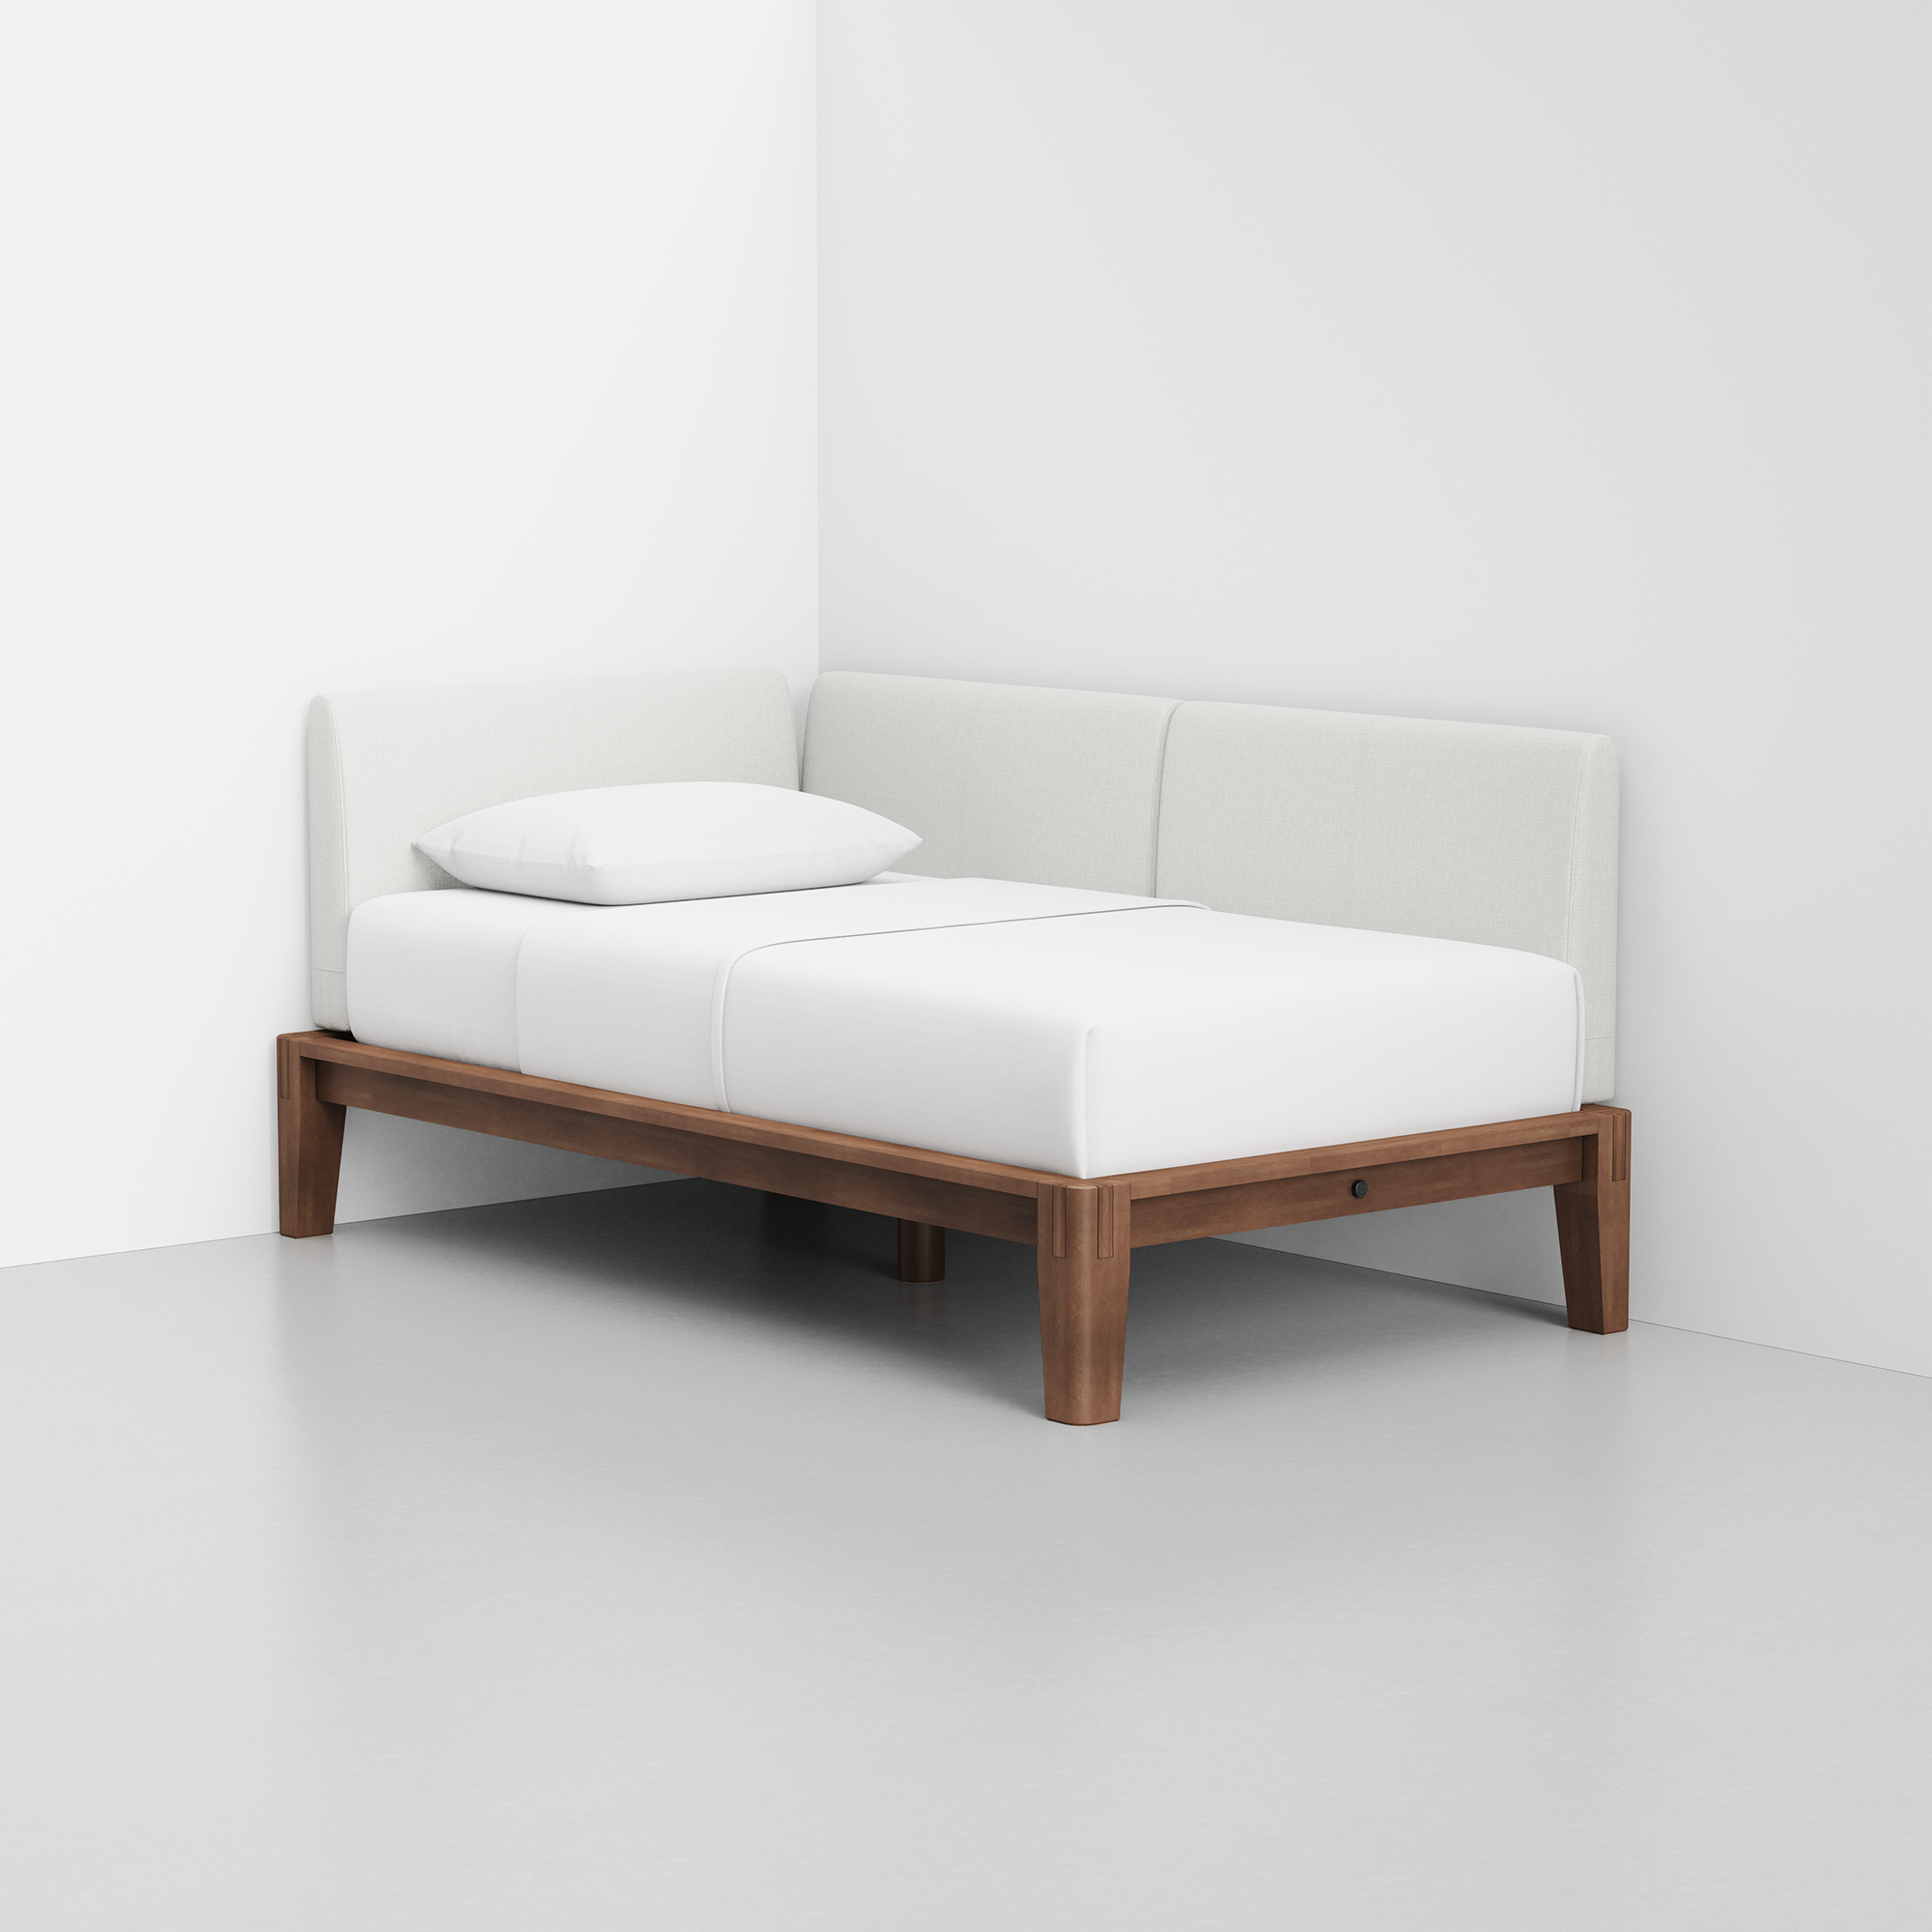 PDP Image: The Daybed (Walnut / Light Linen) - Rendering - Front